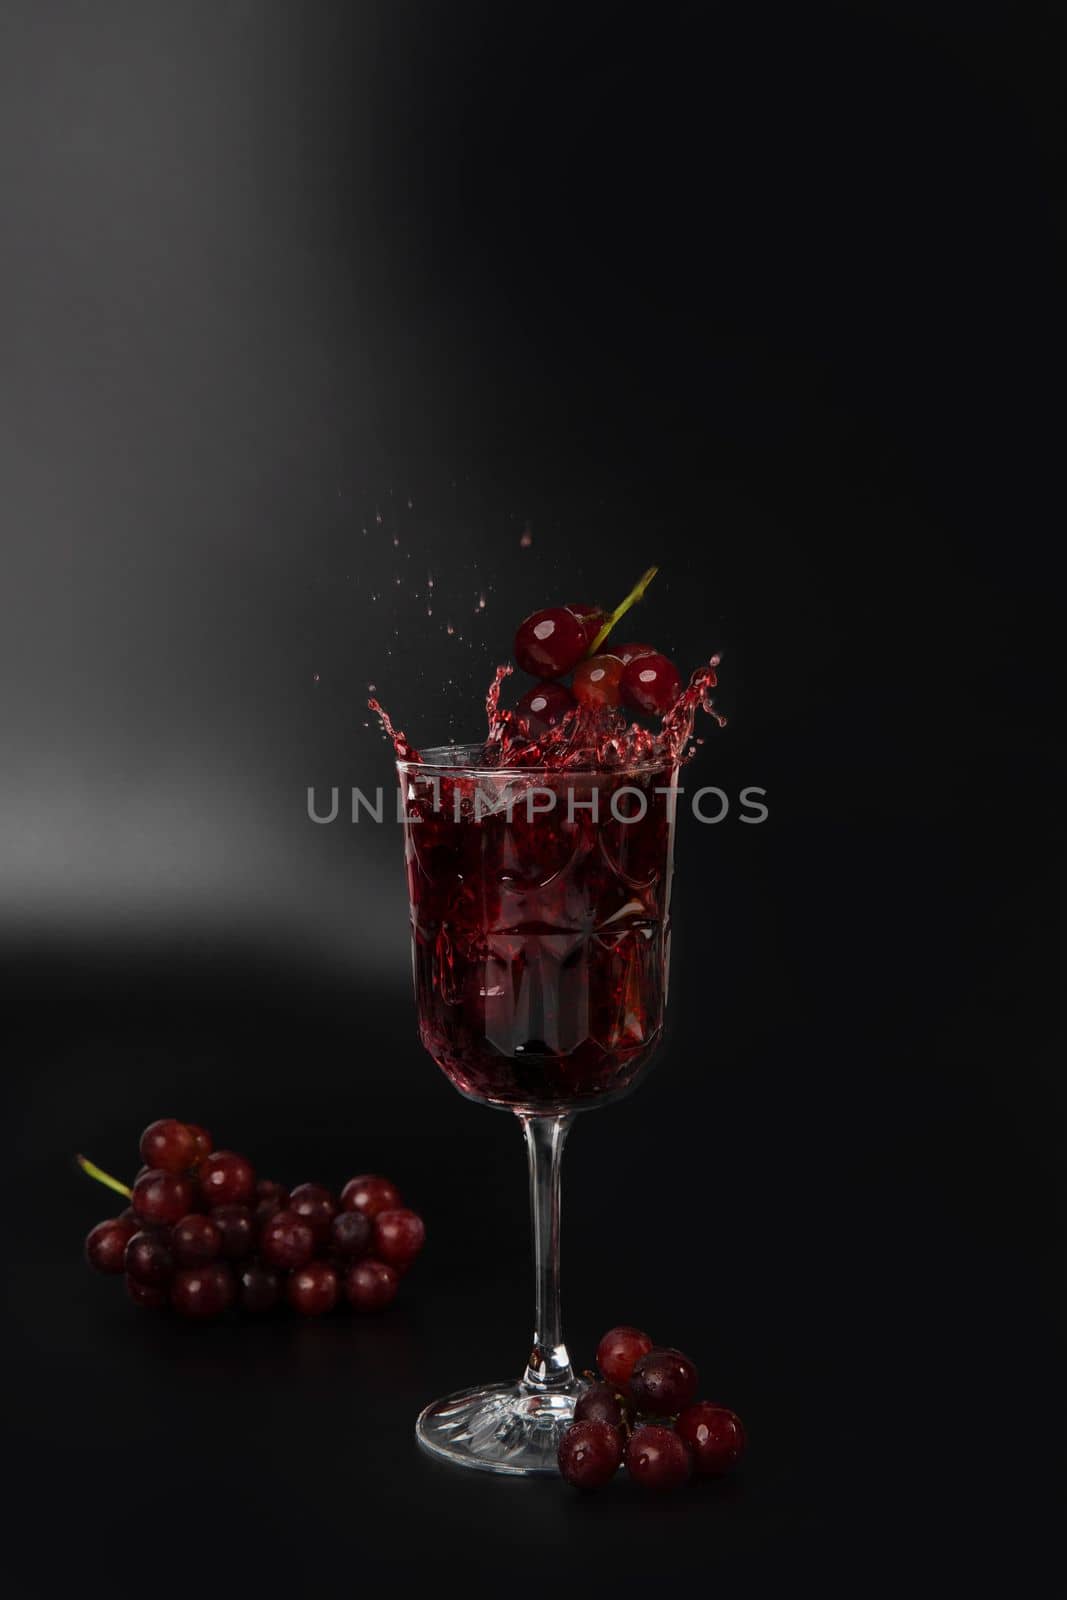 Red wine is poured into a wine glass on a black background with grapes and splash by Annebel146